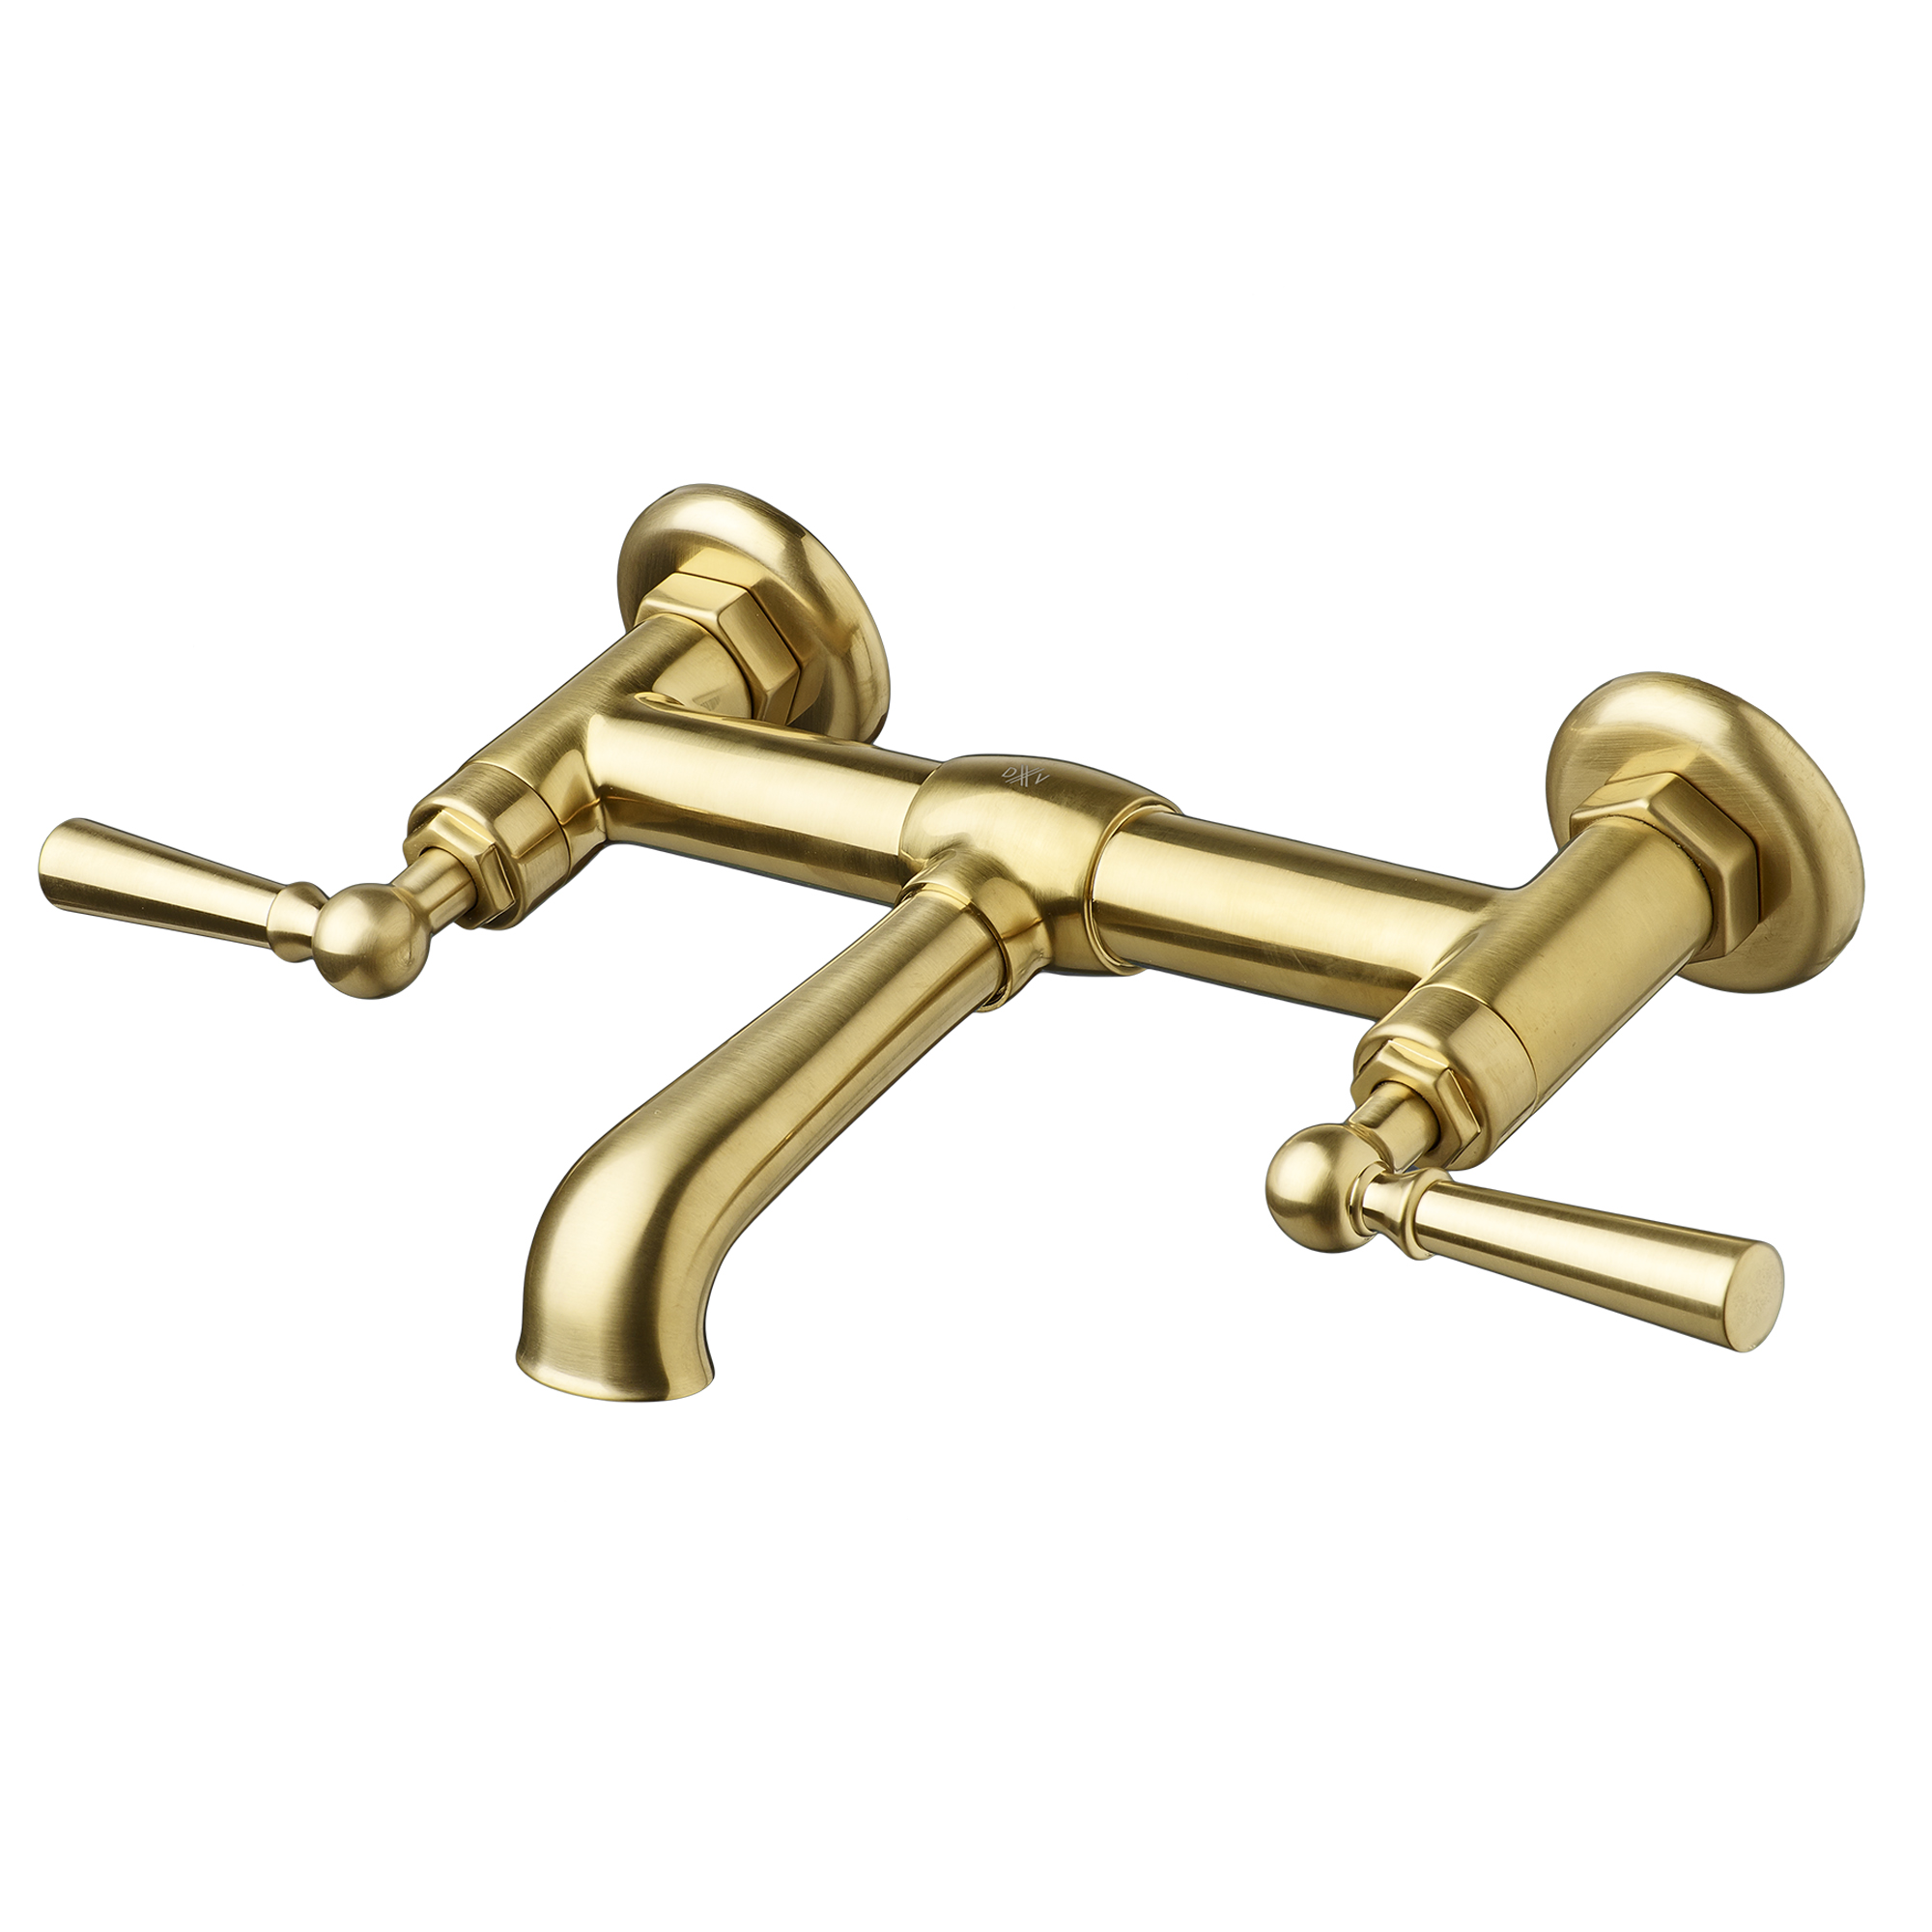 Oak Hill™ 2-Handle Wall Mount Bathroom Faucet with Lever Handles